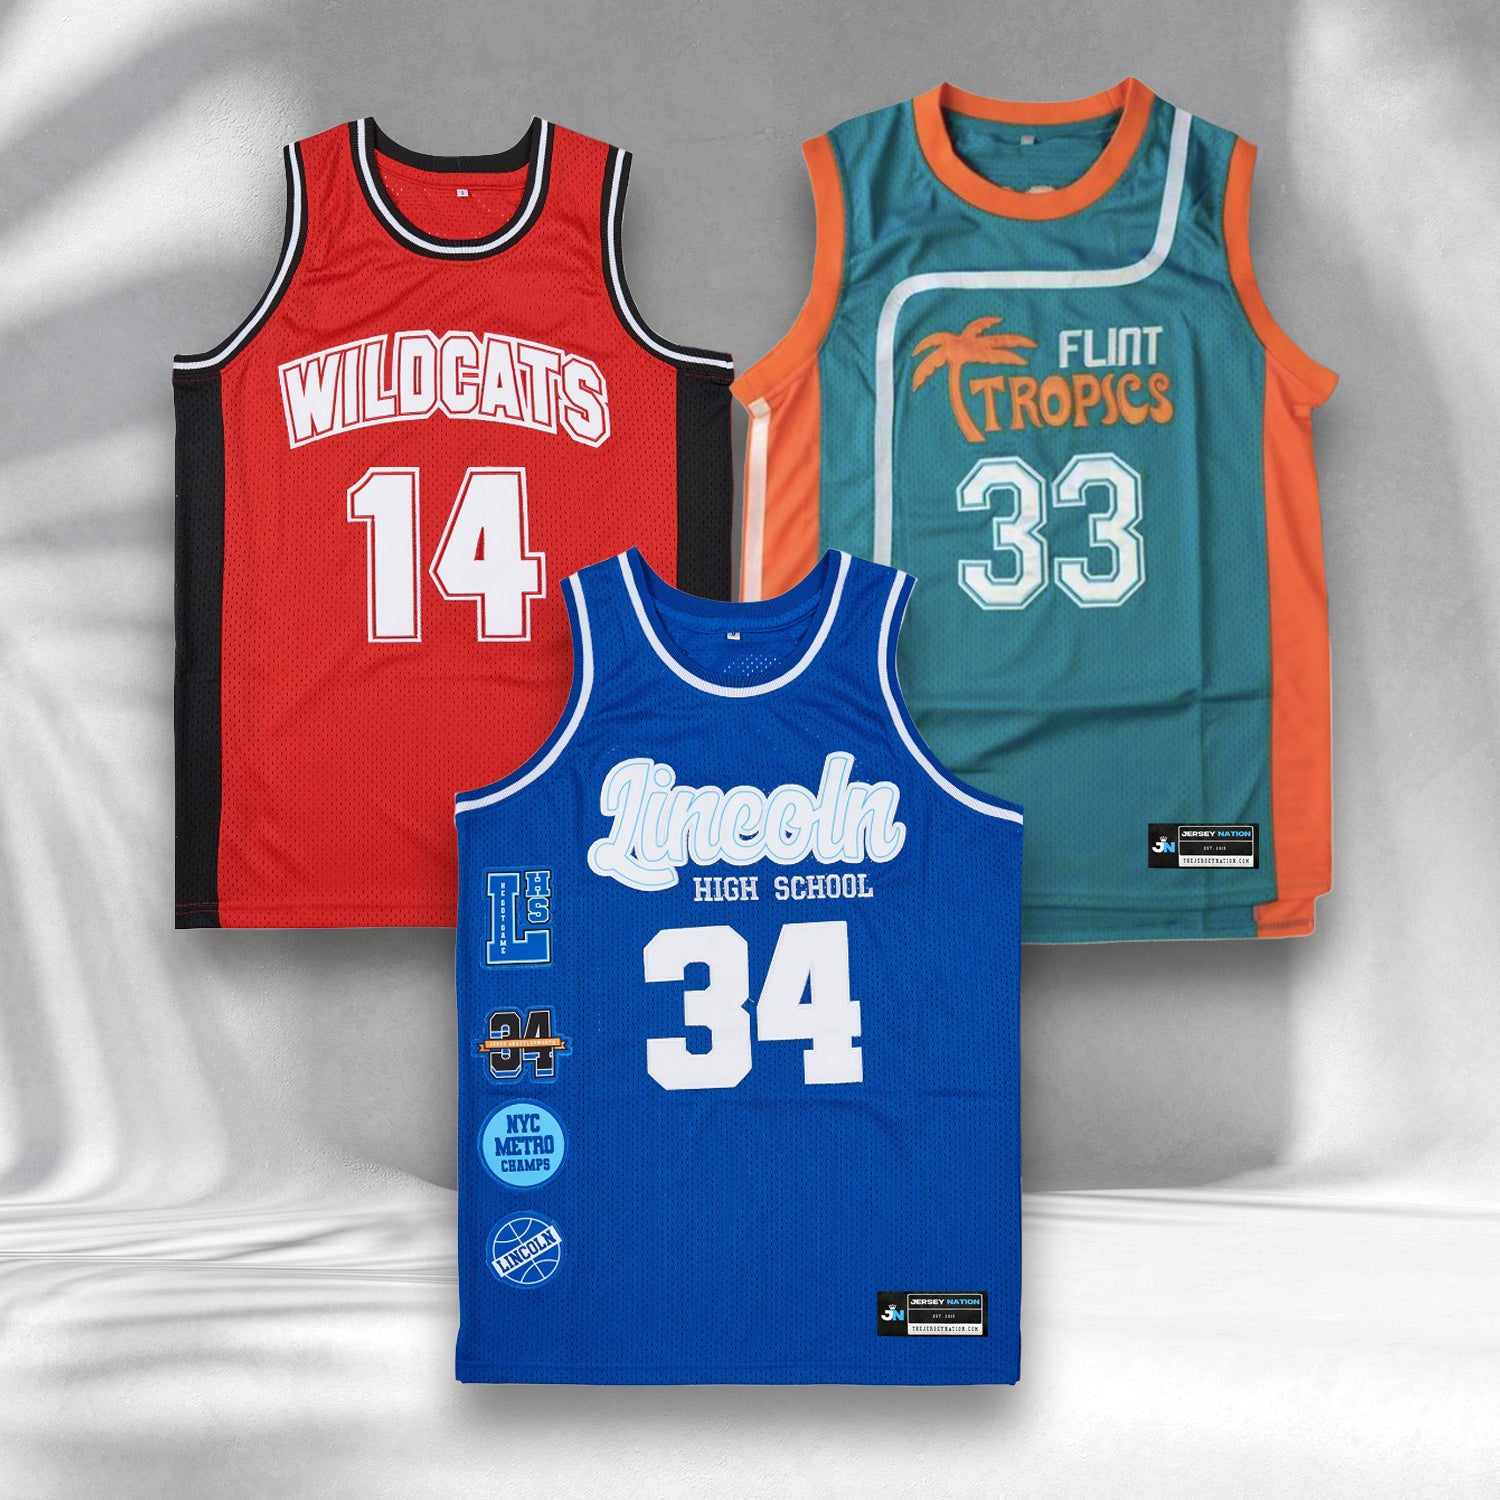 Griswold (Fictitious Jersey Collection)